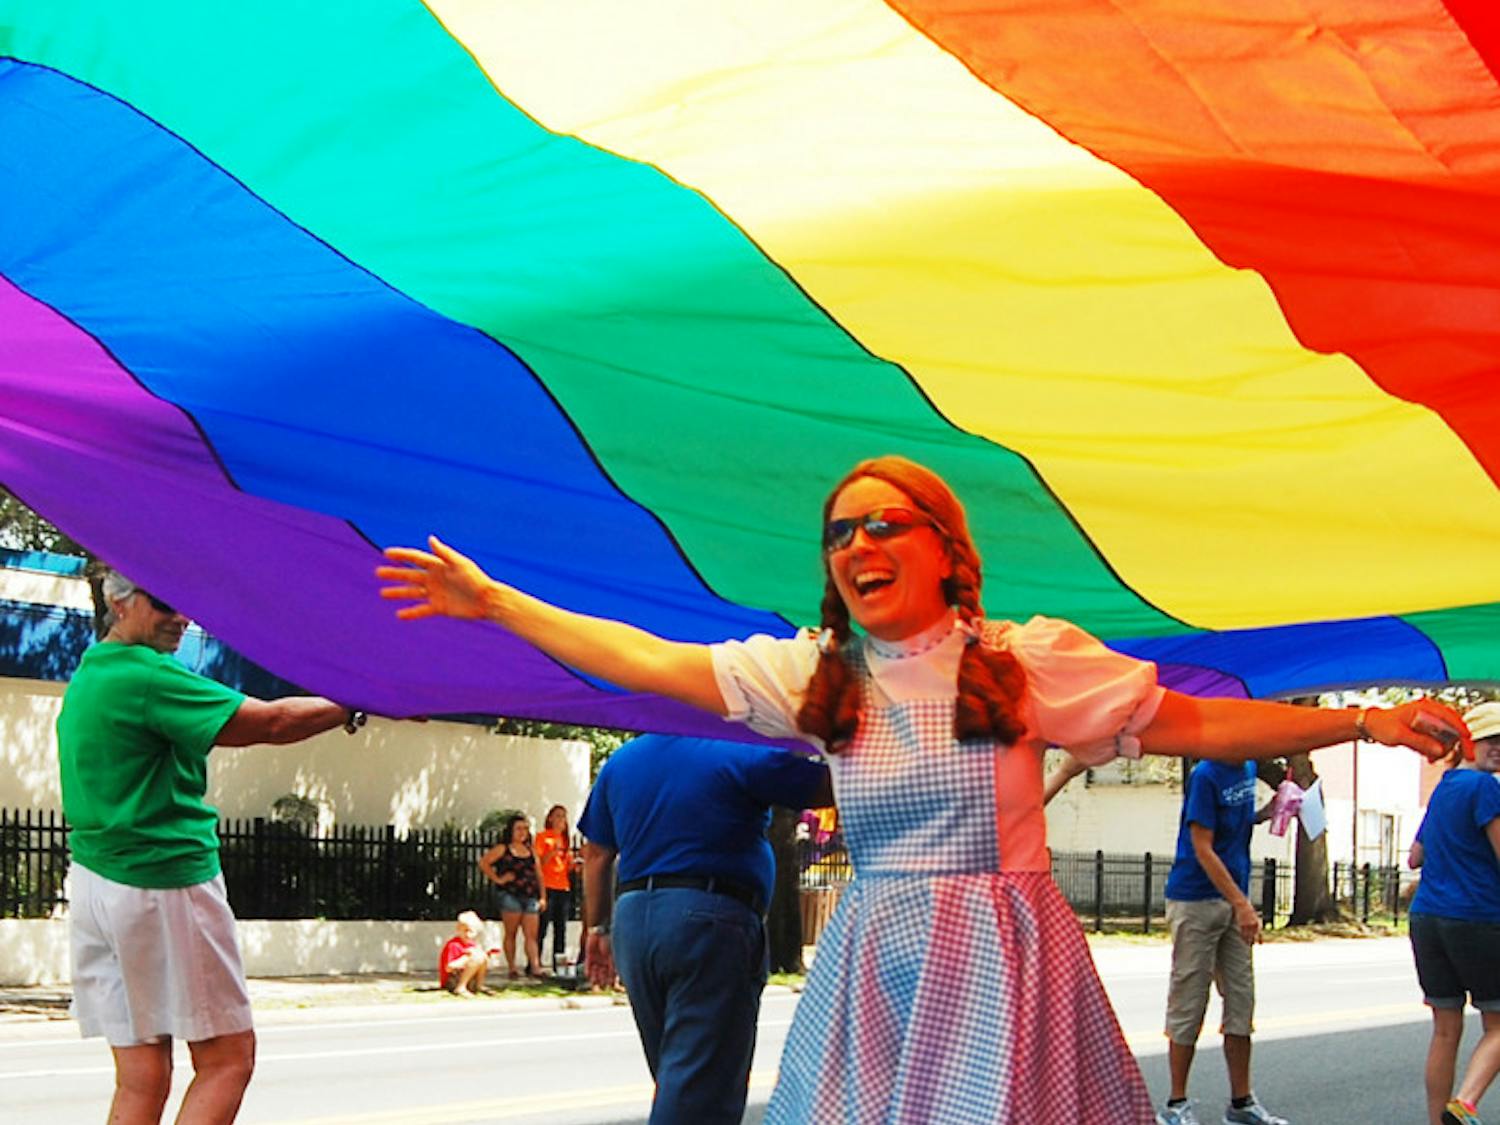 Julie Anspach, 56, dressed as Dorothy, rolls under a rainbow flag during the Gainesville Pride Festival and Parade on Saturday. The flag was held by church members of the United Church of Gainesville, who accept the LGBT community.